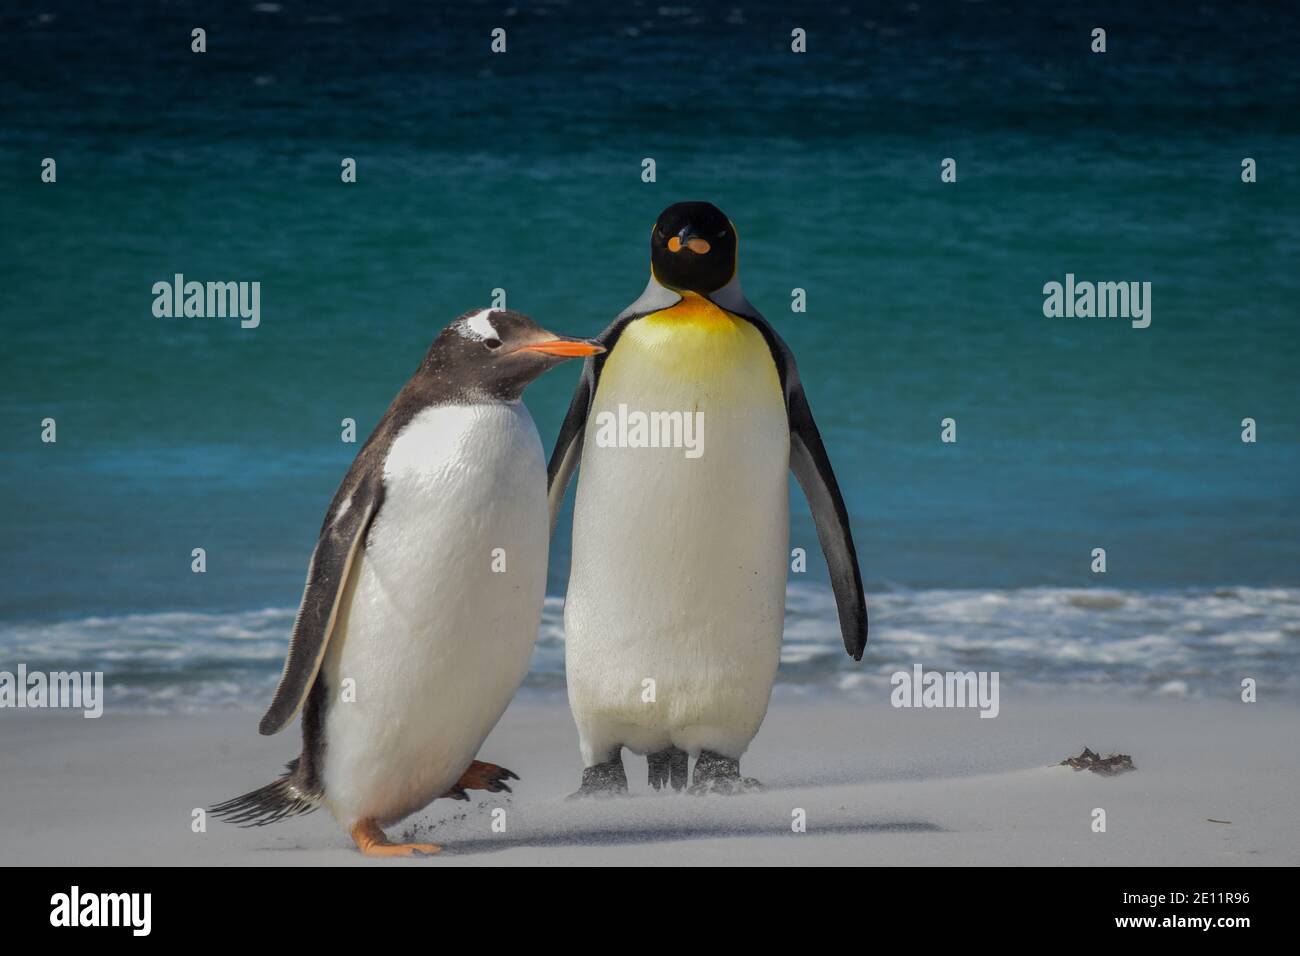 A Gentoo penguin crosses the path of a King penguin on Yorke Bay, a white sand beach in Stanley, Falkland Islands Stock Photo